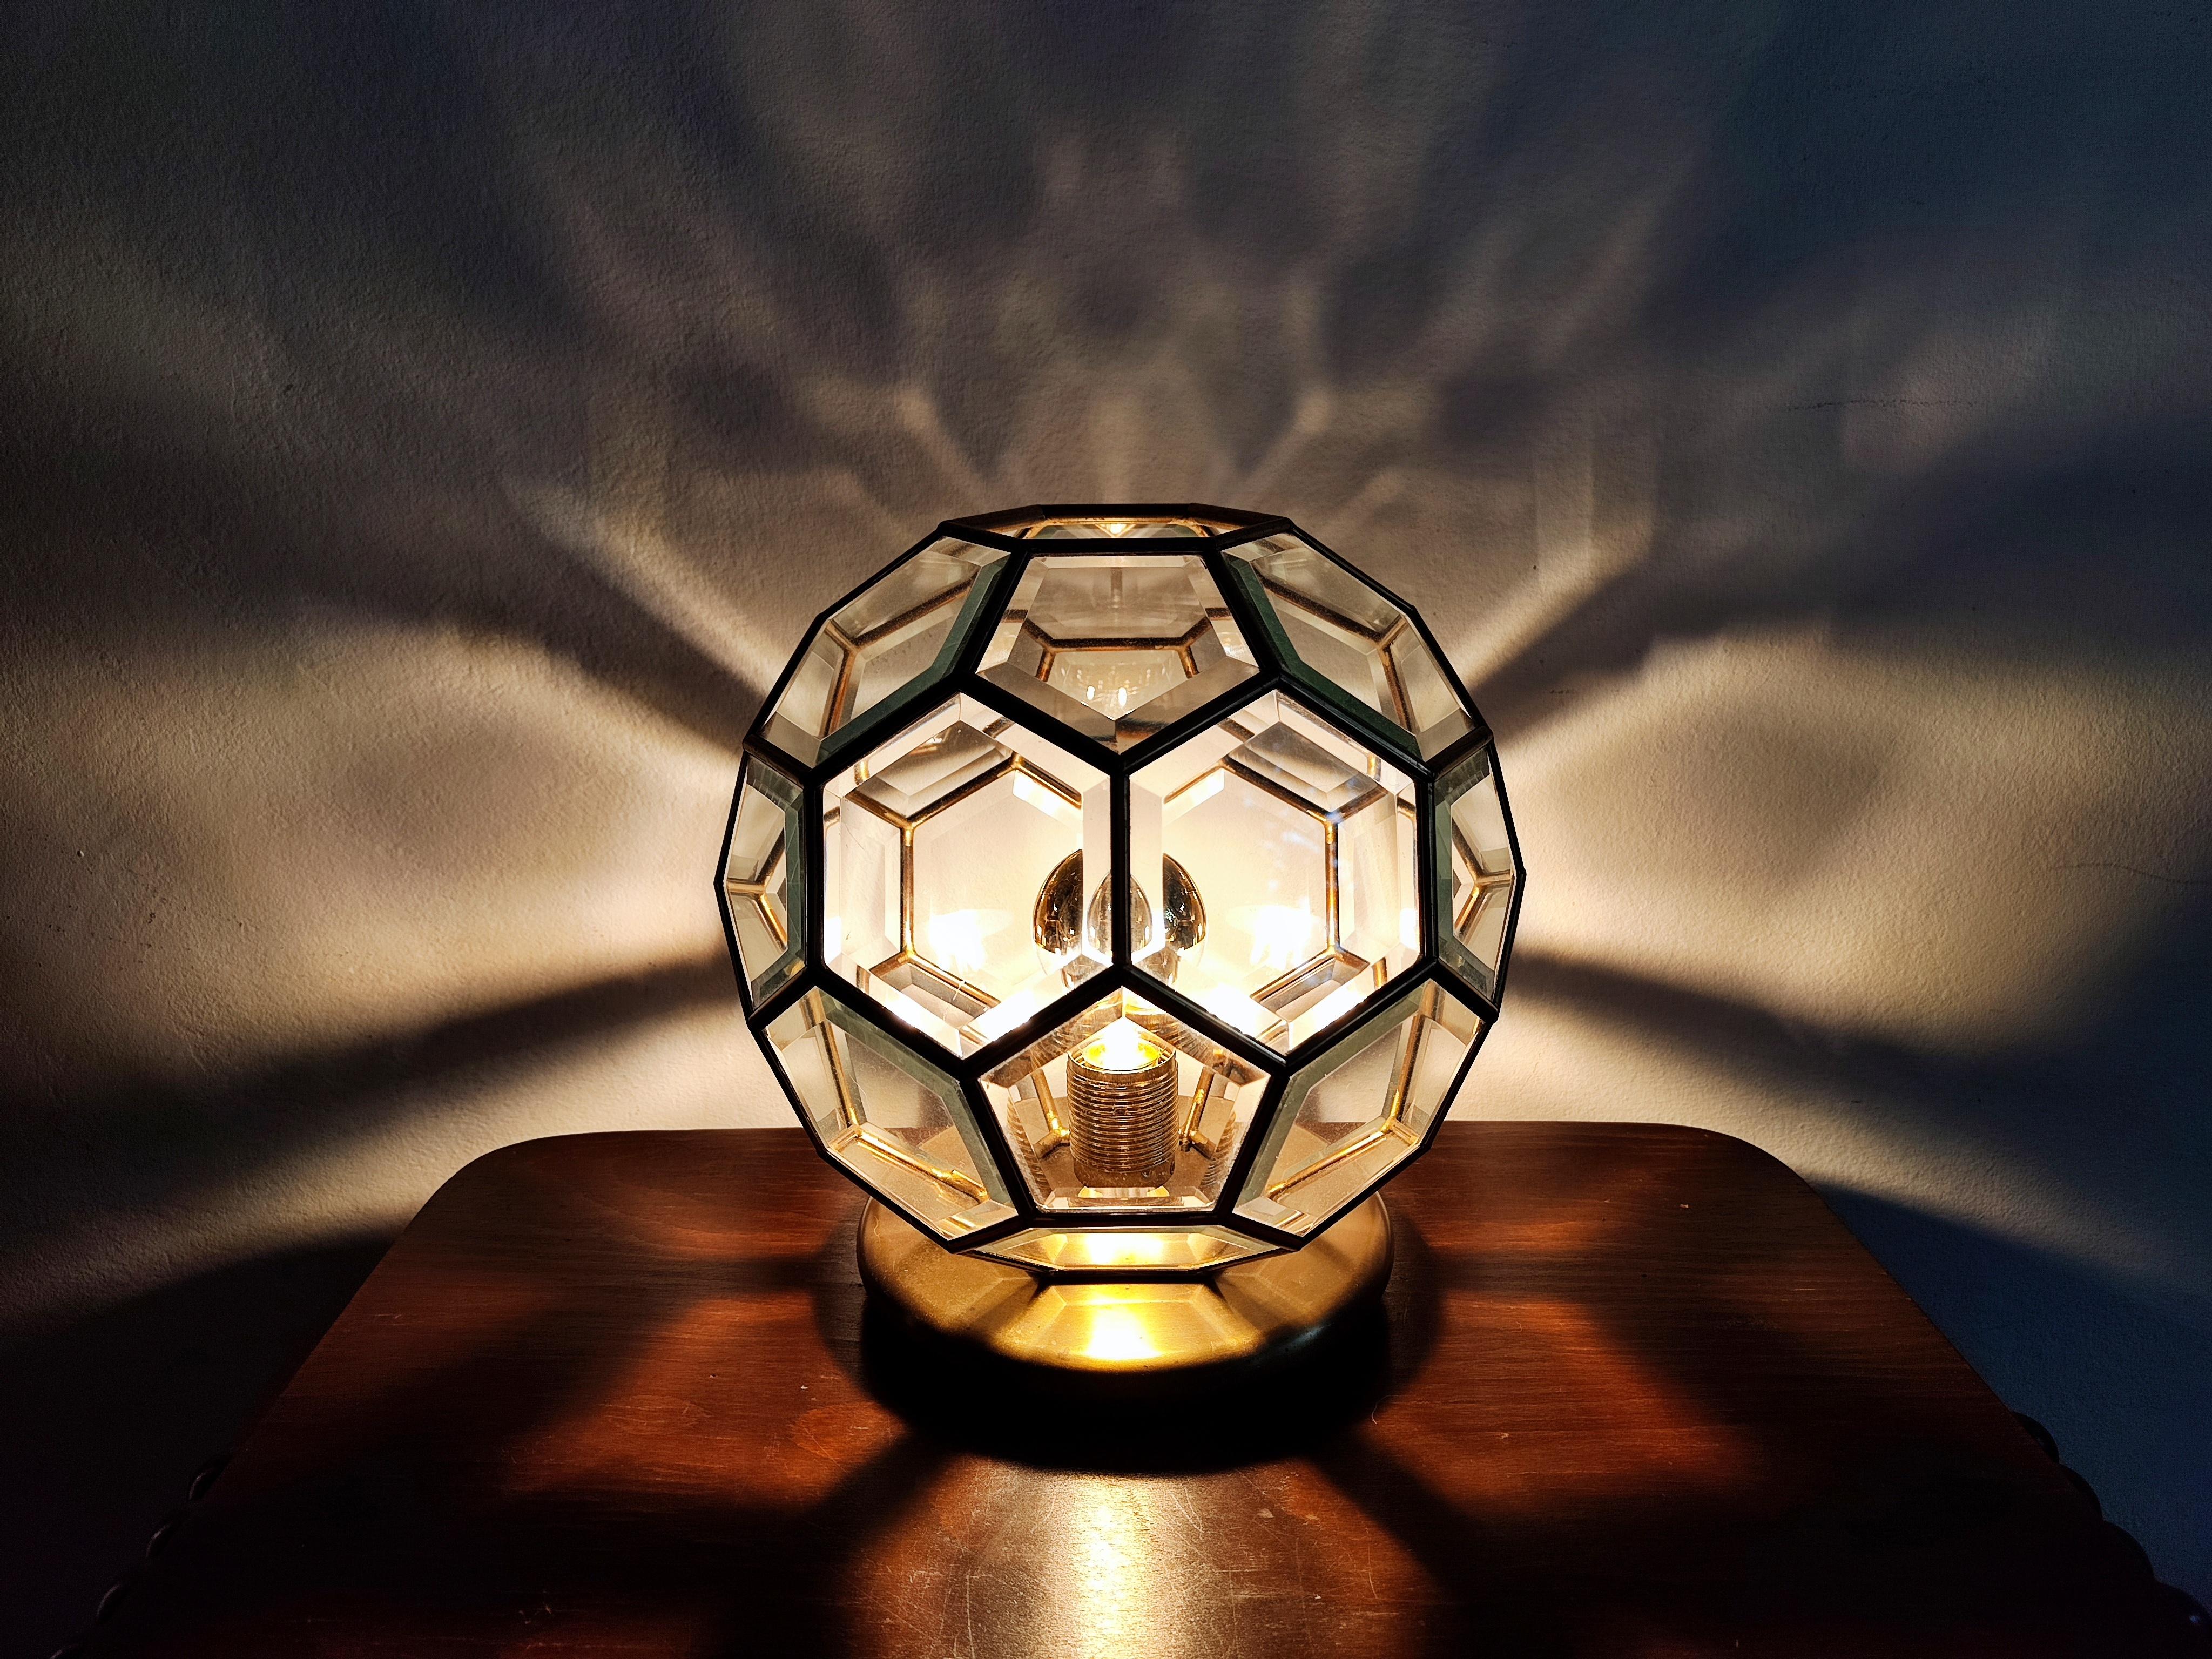 In this listing you will find a gorgeous handmade table lamp in Adolf Loos style. The lamp is inspired by Art Deco style. It is done in brass and faceted glass. 

The shape of the lamp is known in geometry as Truncated Icosahedron, which became